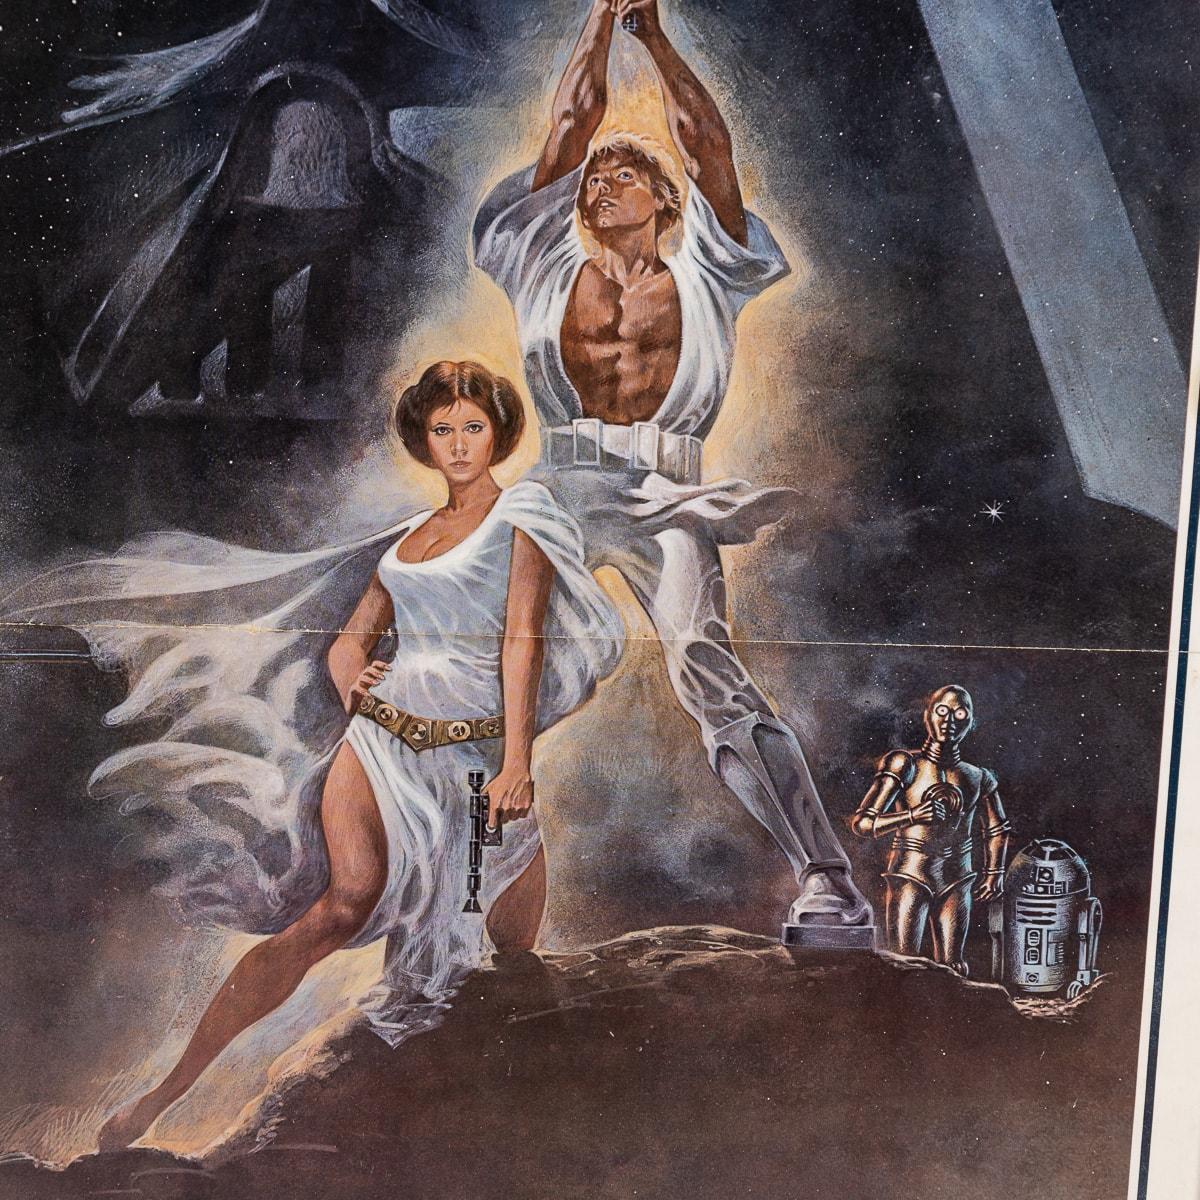 Original U.S. Release Star Wars 'A New Hope' Style A Poster 77/21 c.1977 For Sale 3